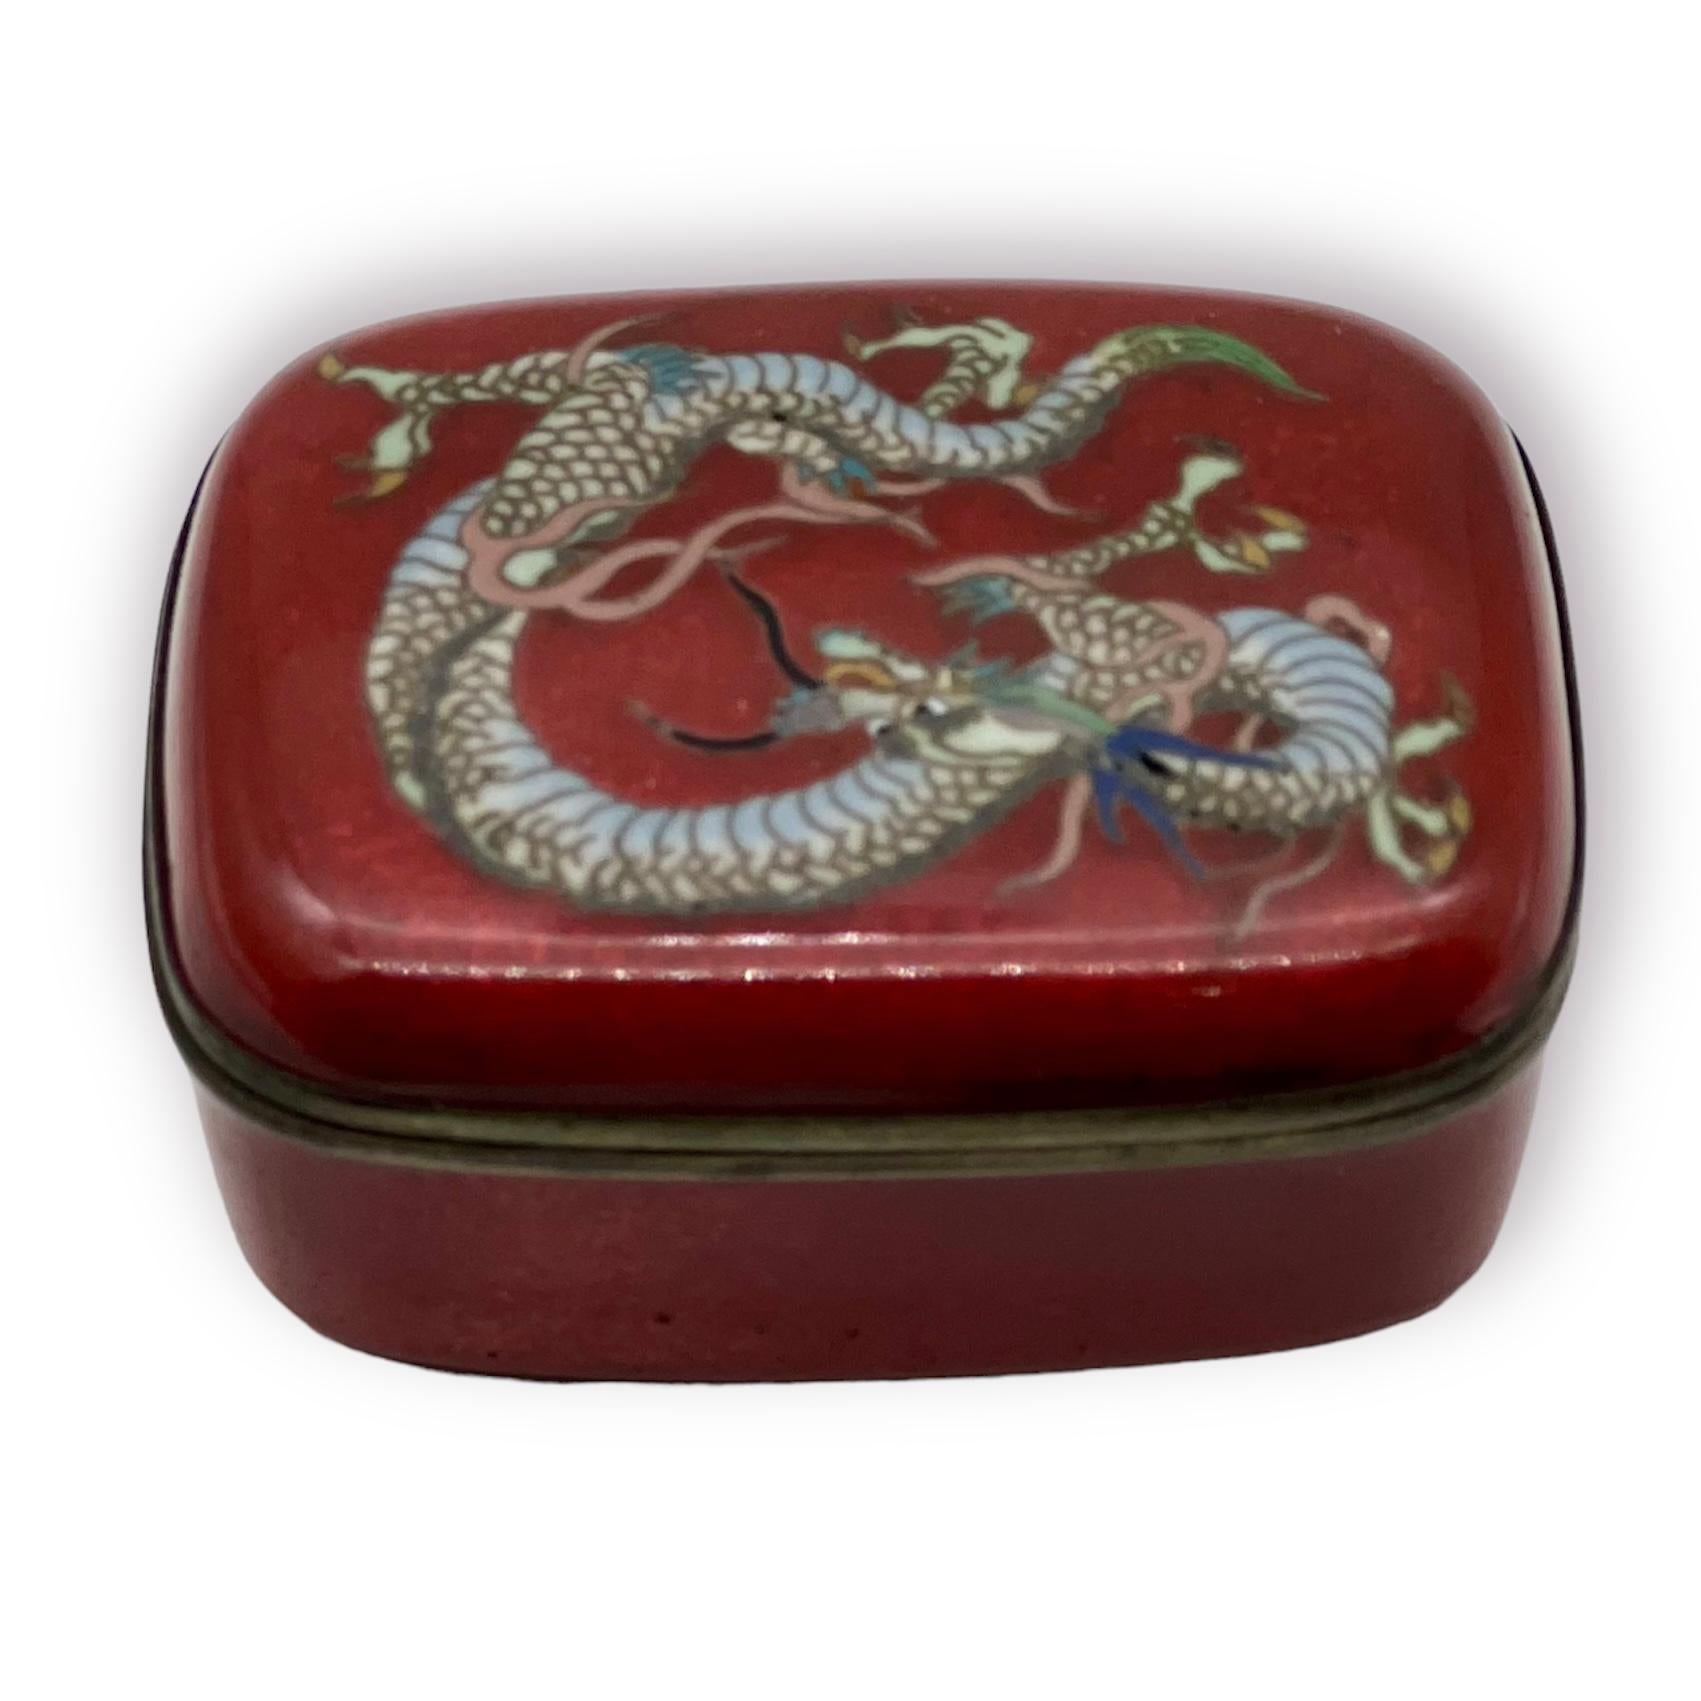 Exquisite Japanese Cloisonne Enamel Box and Cover. 19th C For Sale 3